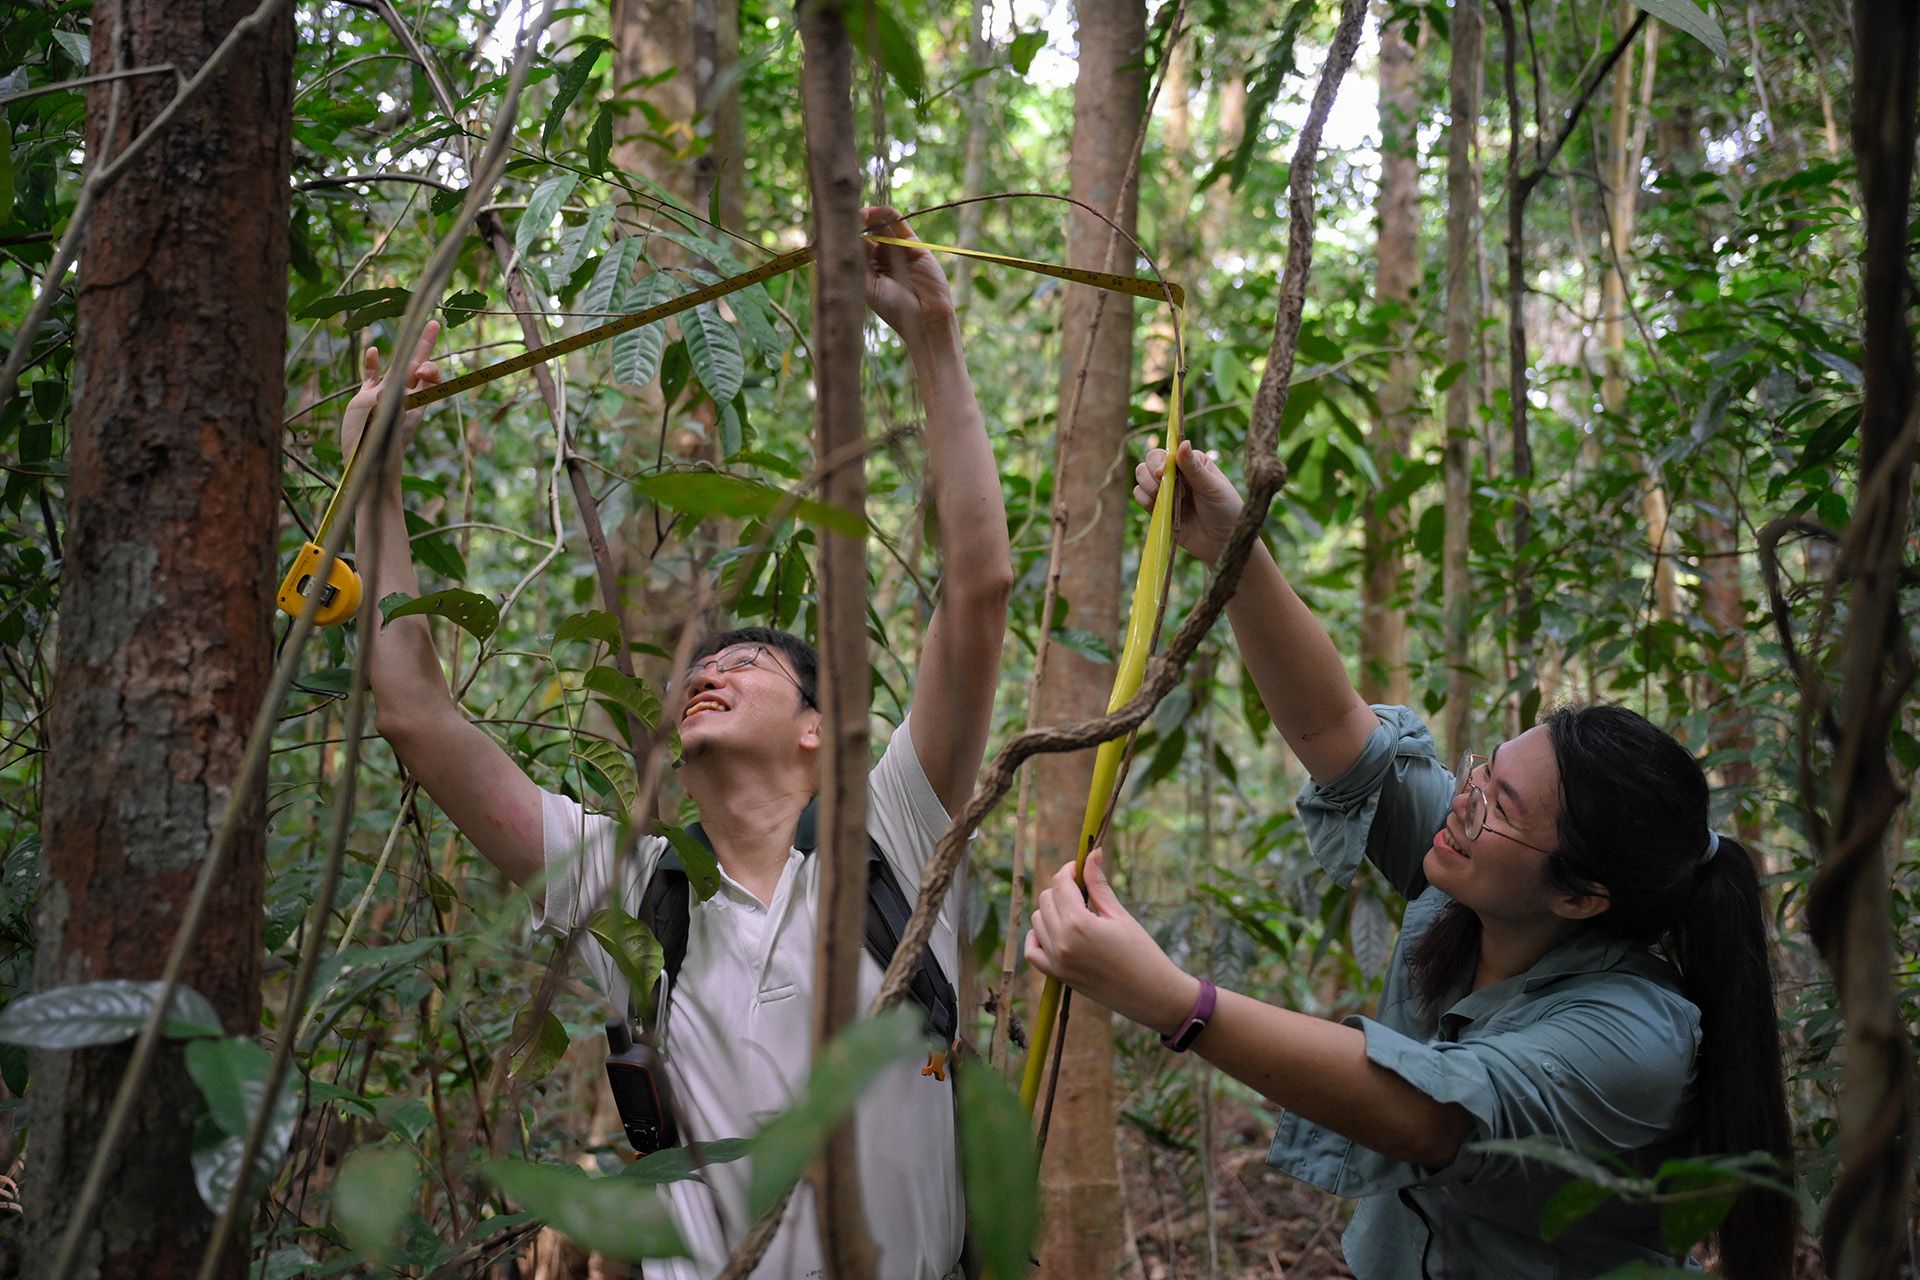 Ms Fung and Dr Chong measuring plants in seedling plots within the Central Catchment Nature Reserve.